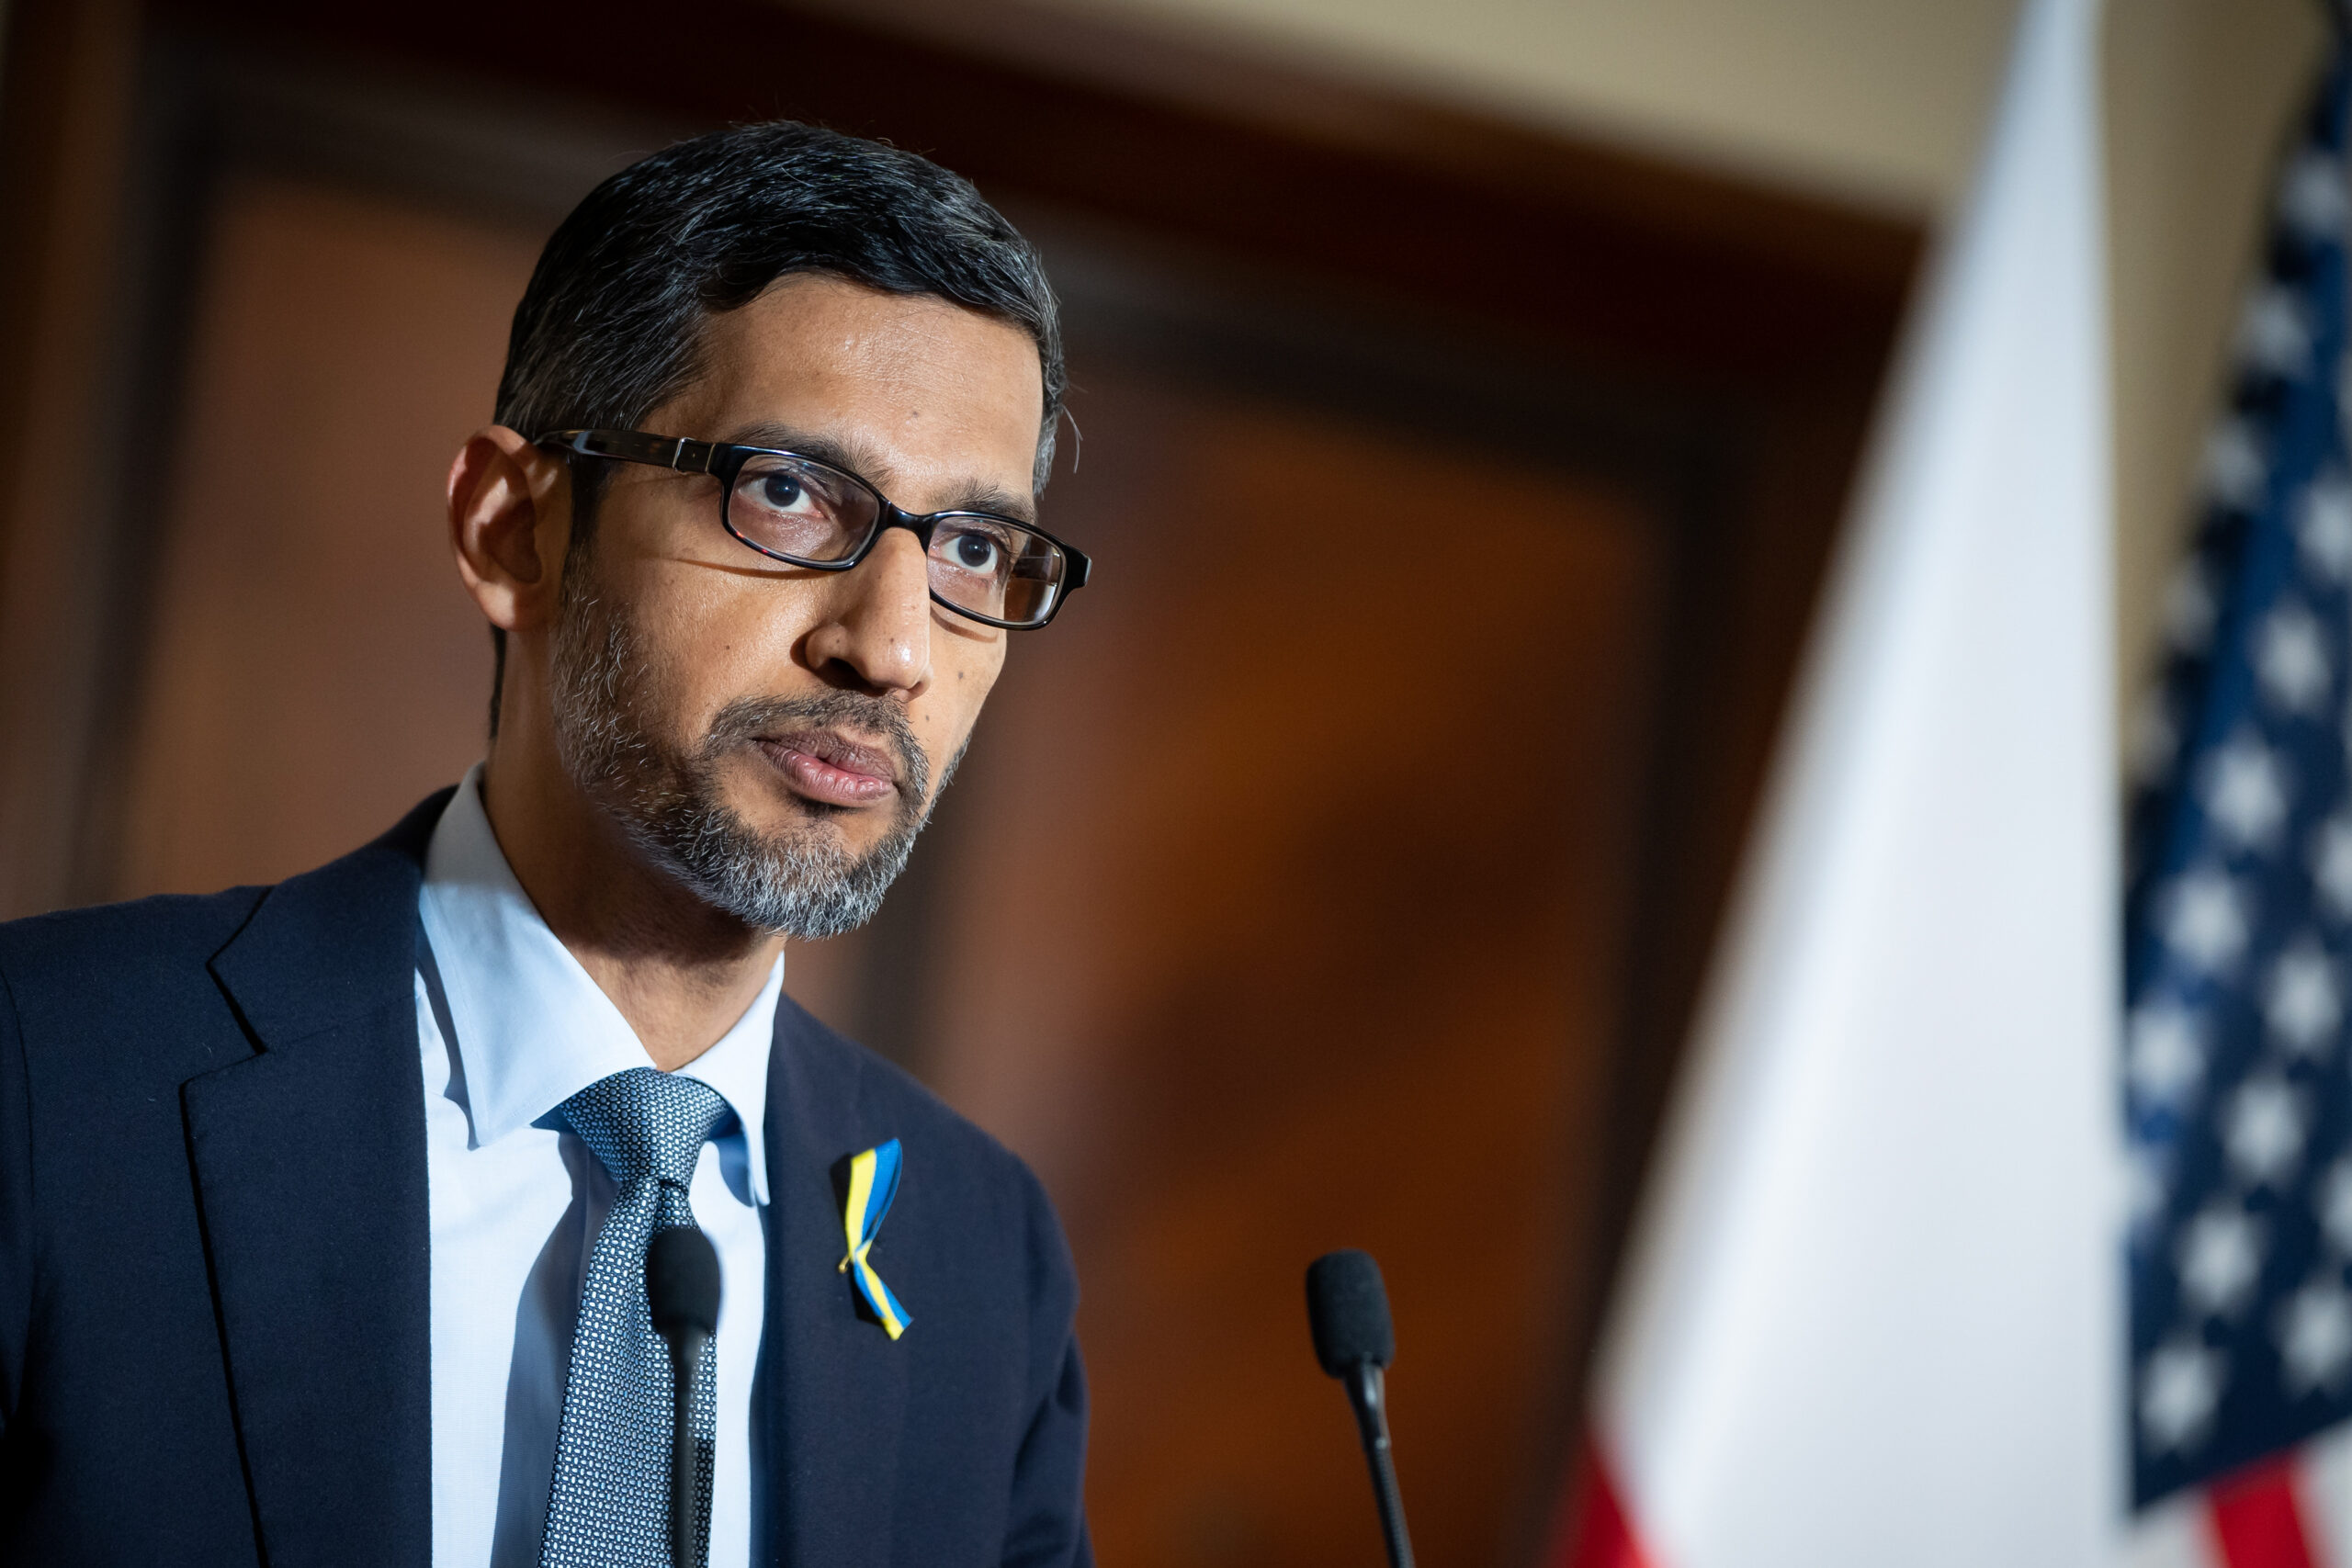 Google CEO Calls For AI Regulation, Warns Society To Brace For Impact Of Technology